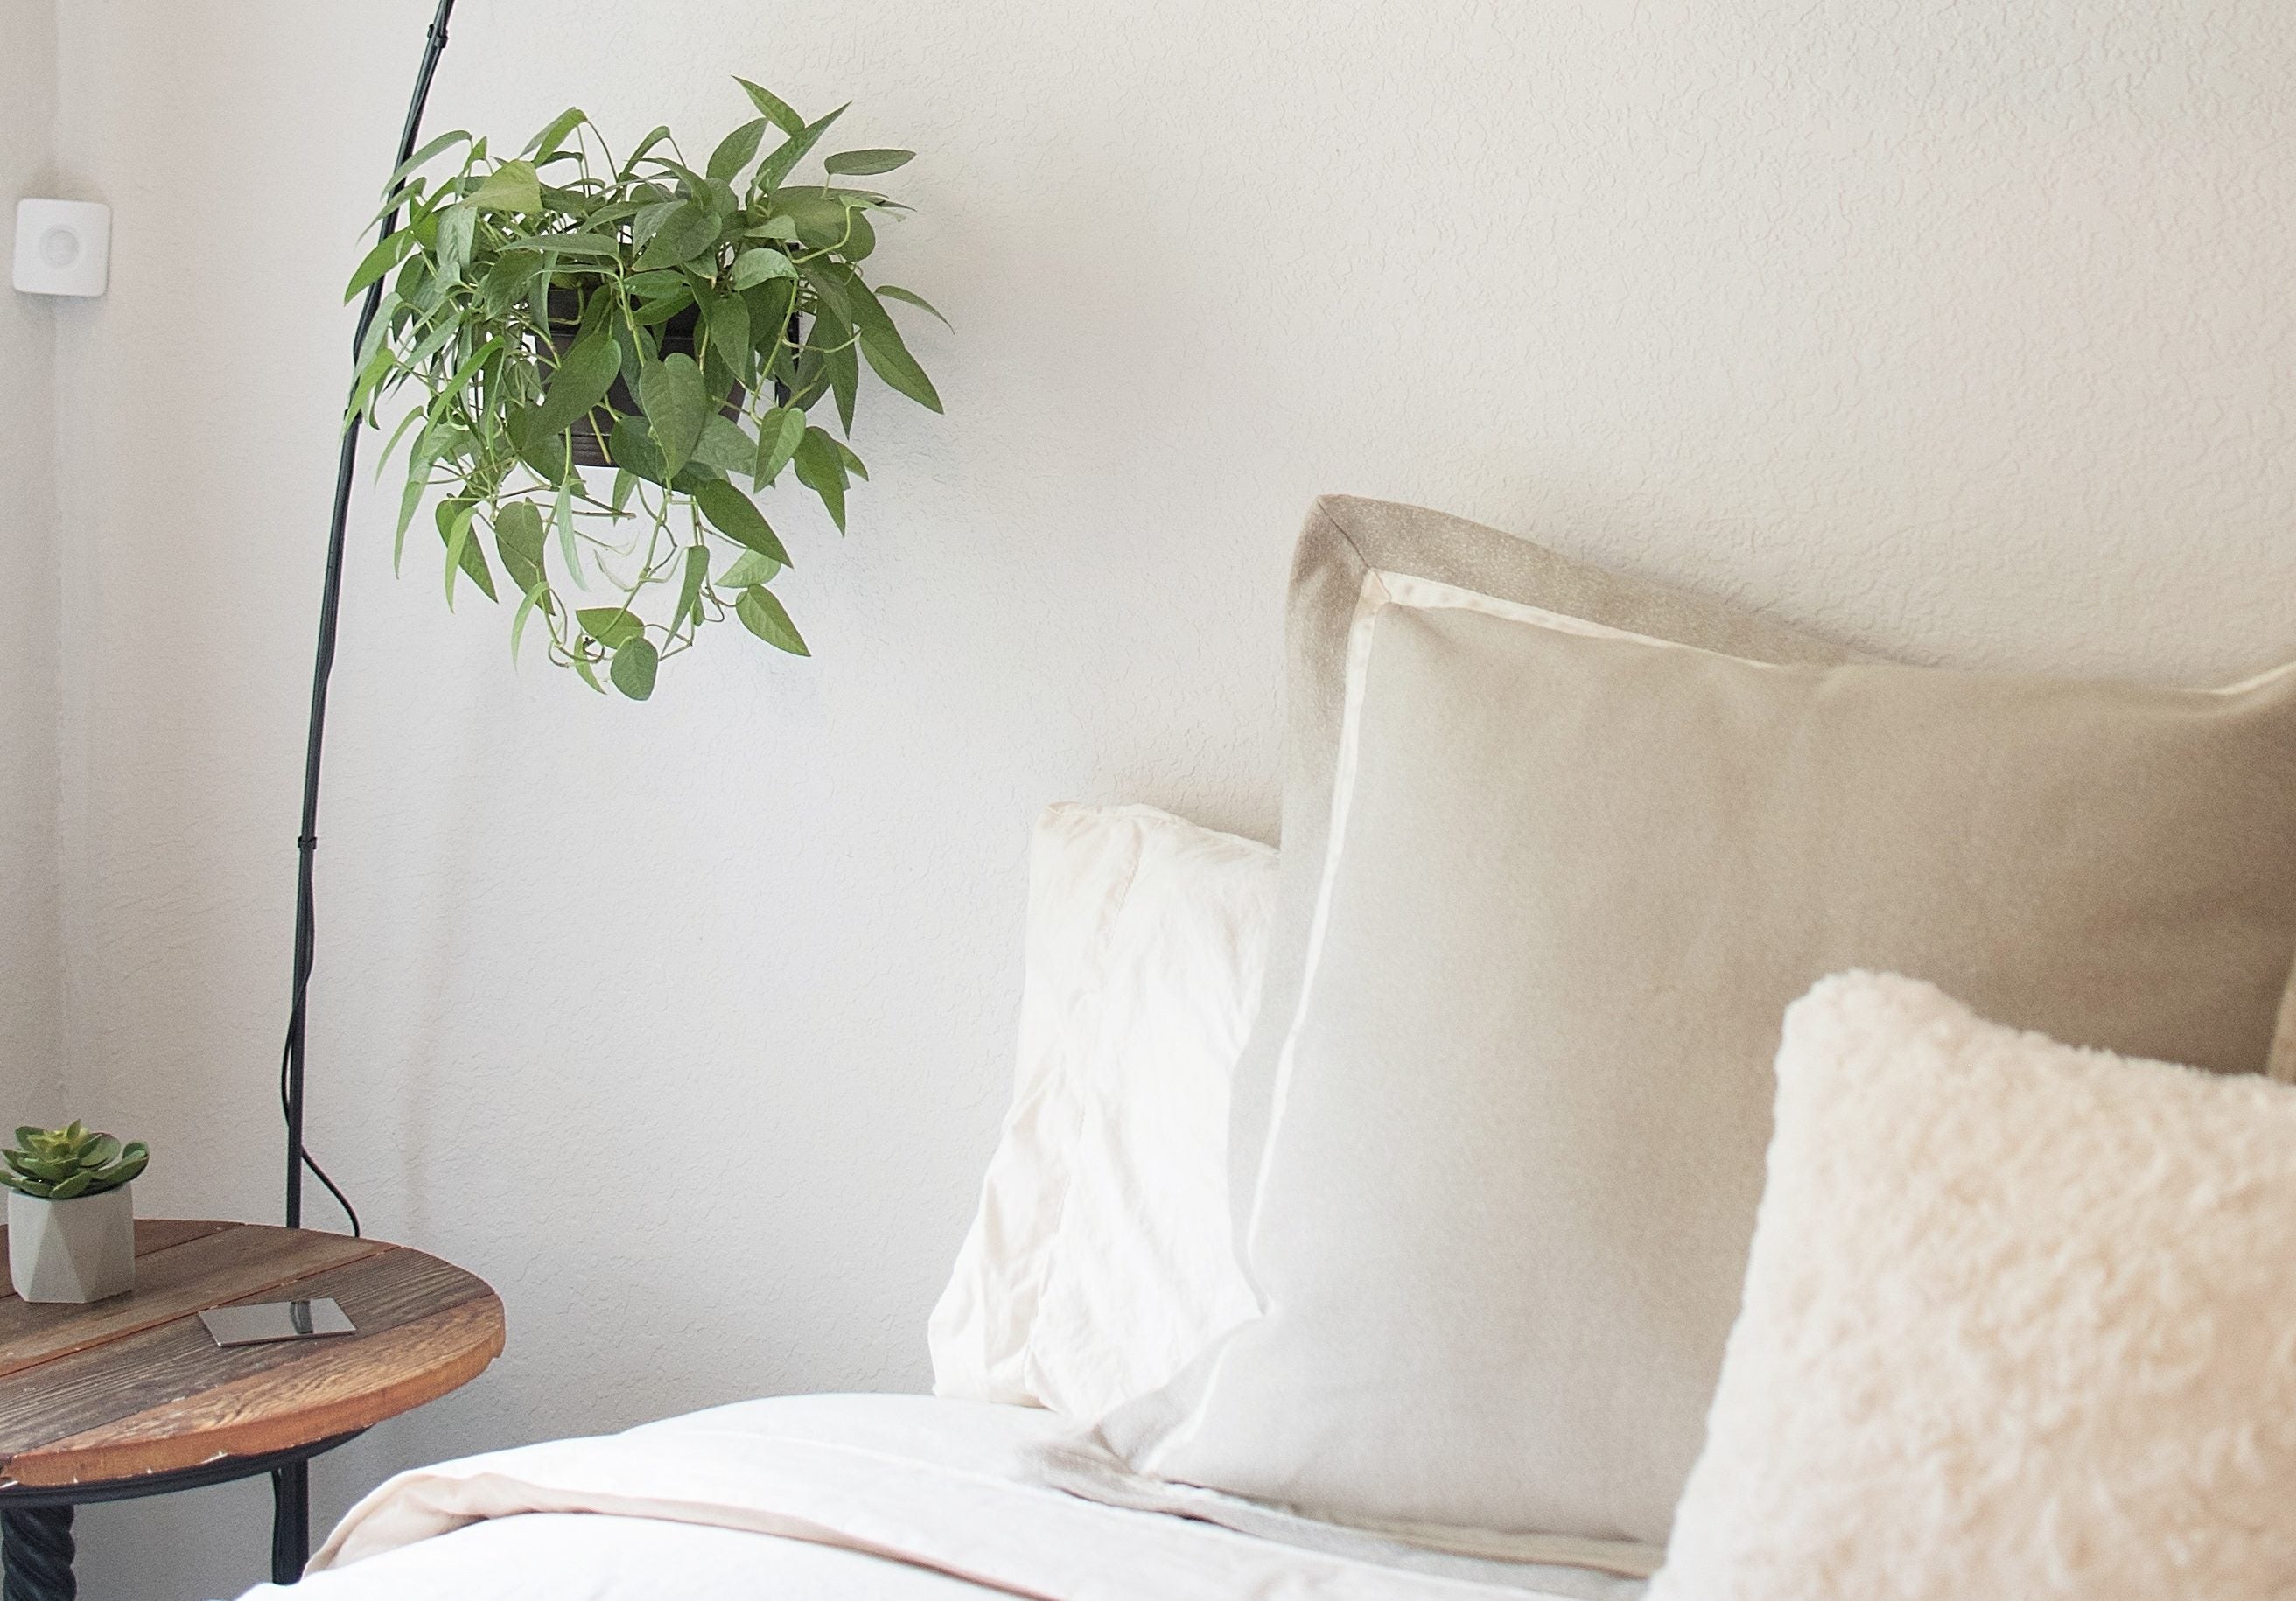 Corner of a bed with pillows on it and a plant hanging over a table next to it